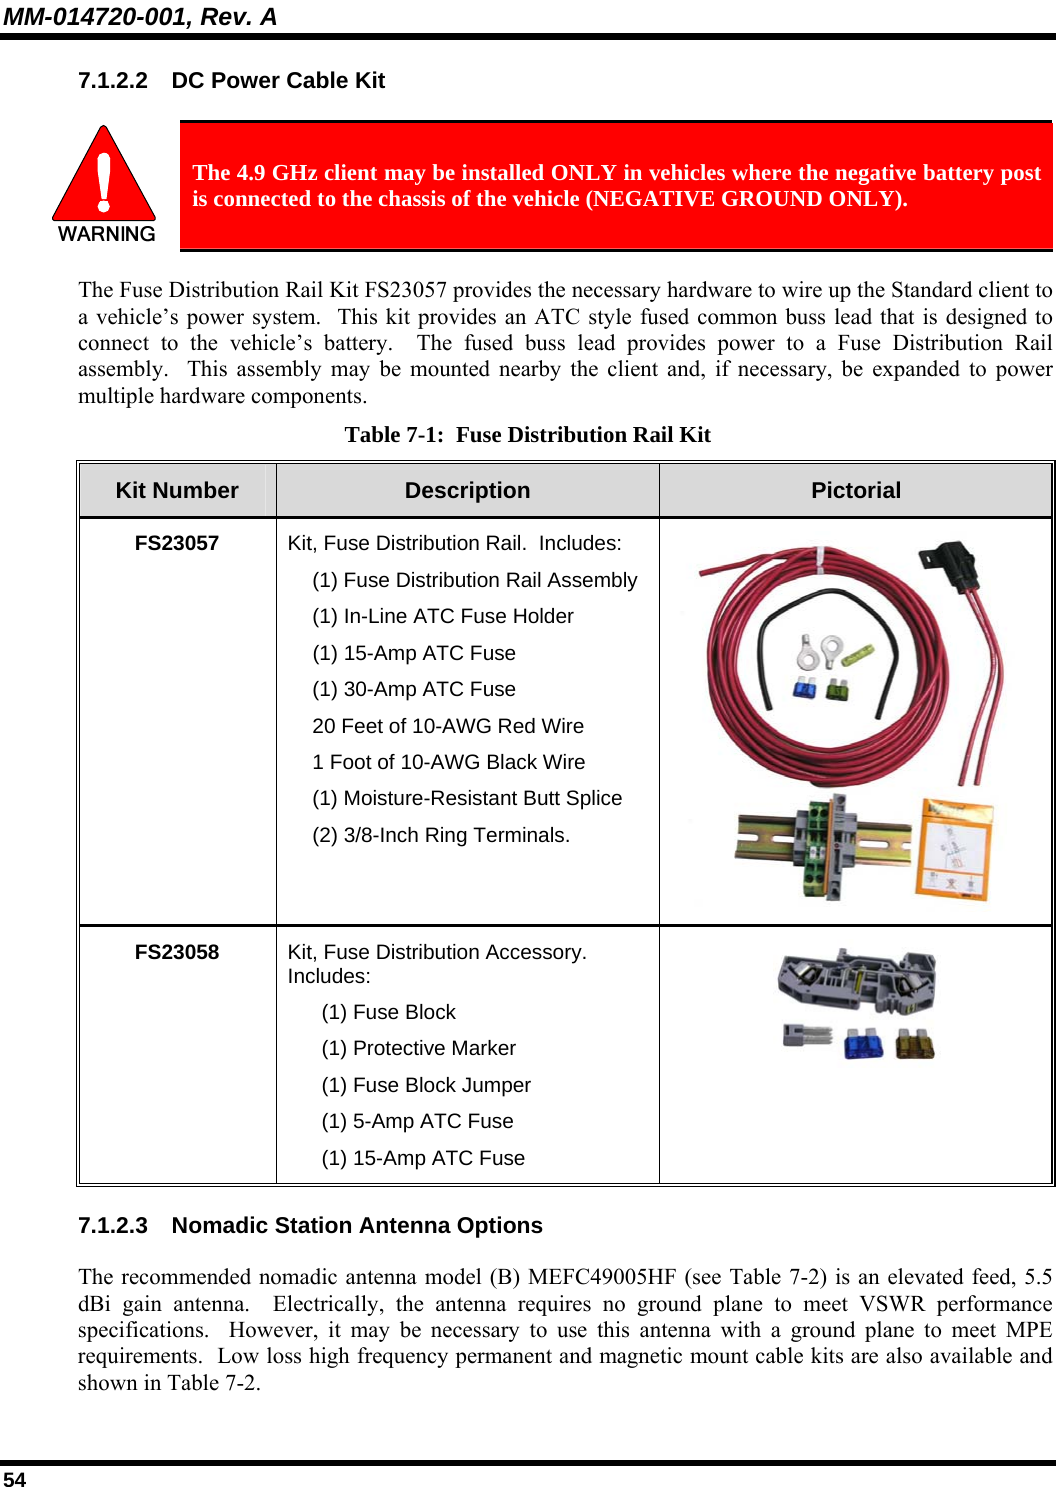 MM-014720-001, Rev. A 54 7.1.2.2  DC Power Cable Kit   The 4.9 GHz client may be installed ONLY in vehicles where the negative battery post is connected to the chassis of the vehicle (NEGATIVE GROUND ONLY). The Fuse Distribution Rail Kit FS23057 provides the necessary hardware to wire up the Standard client to a vehicle’s power system.  This kit provides an ATC style fused common buss lead that is designed to connect to the vehicle’s battery.  The fused buss lead provides power to a Fuse Distribution Rail assembly.  This assembly may be mounted nearby the client and, if necessary, be expanded to power multiple hardware components. Table 7-1:  Fuse Distribution Rail Kit Kit Number  Description  Pictorial FS23057  Kit, Fuse Distribution Rail.  Includes:   (1) Fuse Distribution Rail Assembly   (1) In-Line ATC Fuse Holder  (1) 15-Amp ATC Fuse   (1) 30-Amp ATC Fuse   20 Feet of 10-AWG Red Wire   1 Foot of 10-AWG Black Wire   (1) Moisture-Resistant Butt Splice   (2) 3/8-Inch Ring Terminals. FS23058  Kit, Fuse Distribution Accessory.  Includes:   (1) Fuse Block   (1) Protective Marker   (1) Fuse Block Jumper   (1) 5-Amp ATC Fuse   (1) 15-Amp ATC Fuse  7.1.2.3  Nomadic Station Antenna Options The recommended nomadic antenna model (B) MEFC49005HF (see Table 7-2) is an elevated feed, 5.5 dBi gain antenna.  Electrically, the antenna requires no ground plane to meet VSWR performance specifications.  However, it may be necessary to use this antenna with a ground plane to meet MPE requirements.  Low loss high frequency permanent and magnetic mount cable kits are also available and shown in Table 7-2. 